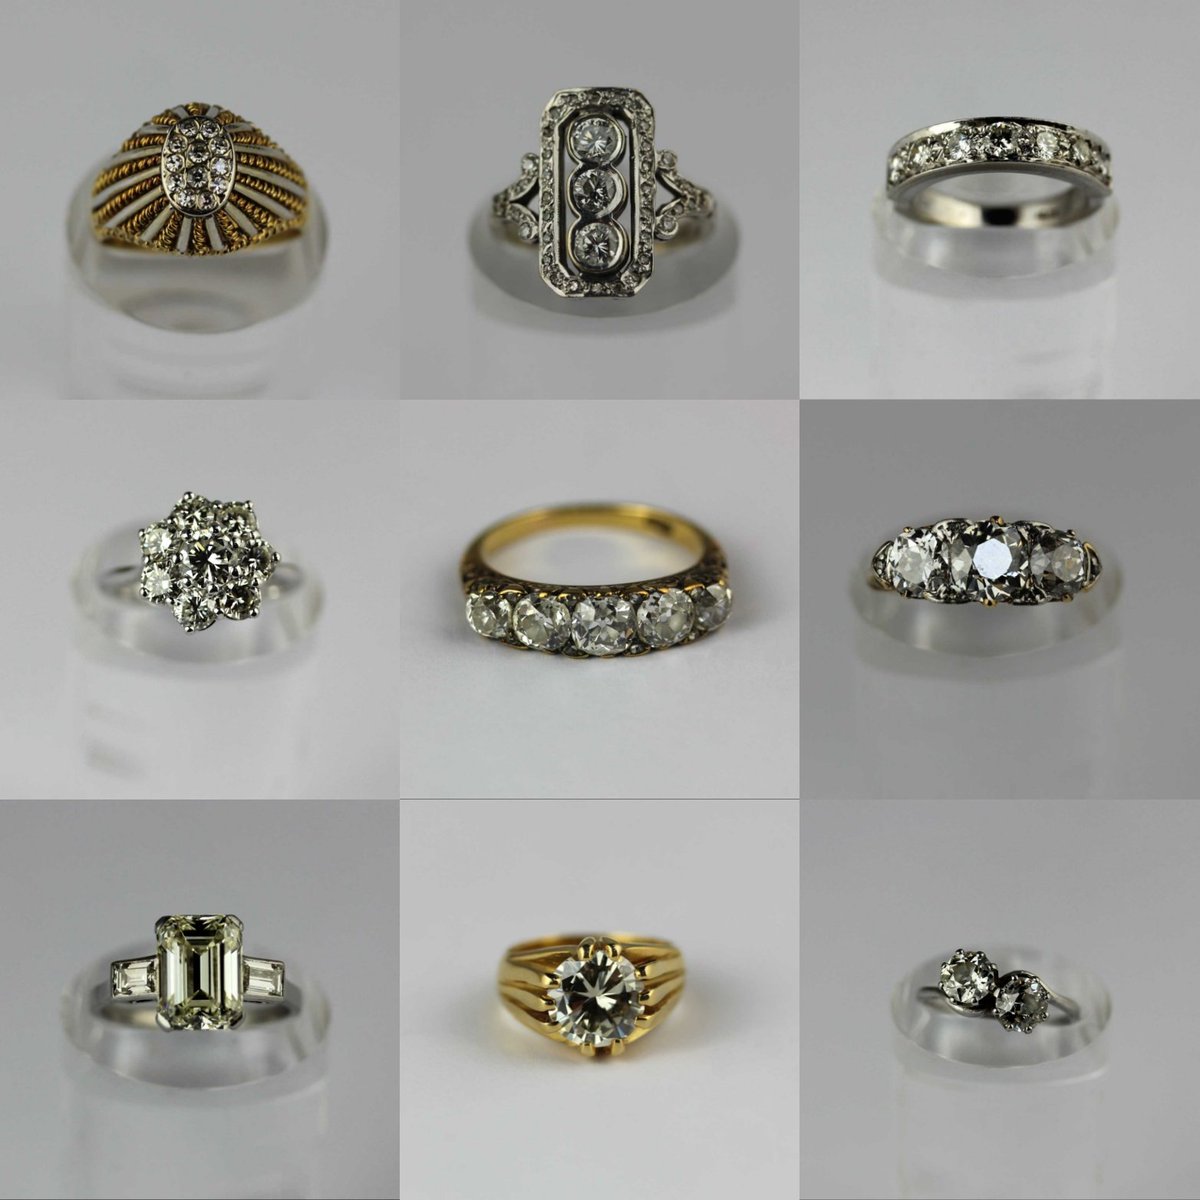 A selection of the beautiful diamond rings in our upcoming Two Day Selected Antiques and Fine Art Auction to include Silver and Jewellery THURSDAY 25TH and FRIDAY 26TH APRIL 

henryadamsfineart.co.uk 

#diamondring
#diamondbrooch #diamondwatch #diamondsareforever